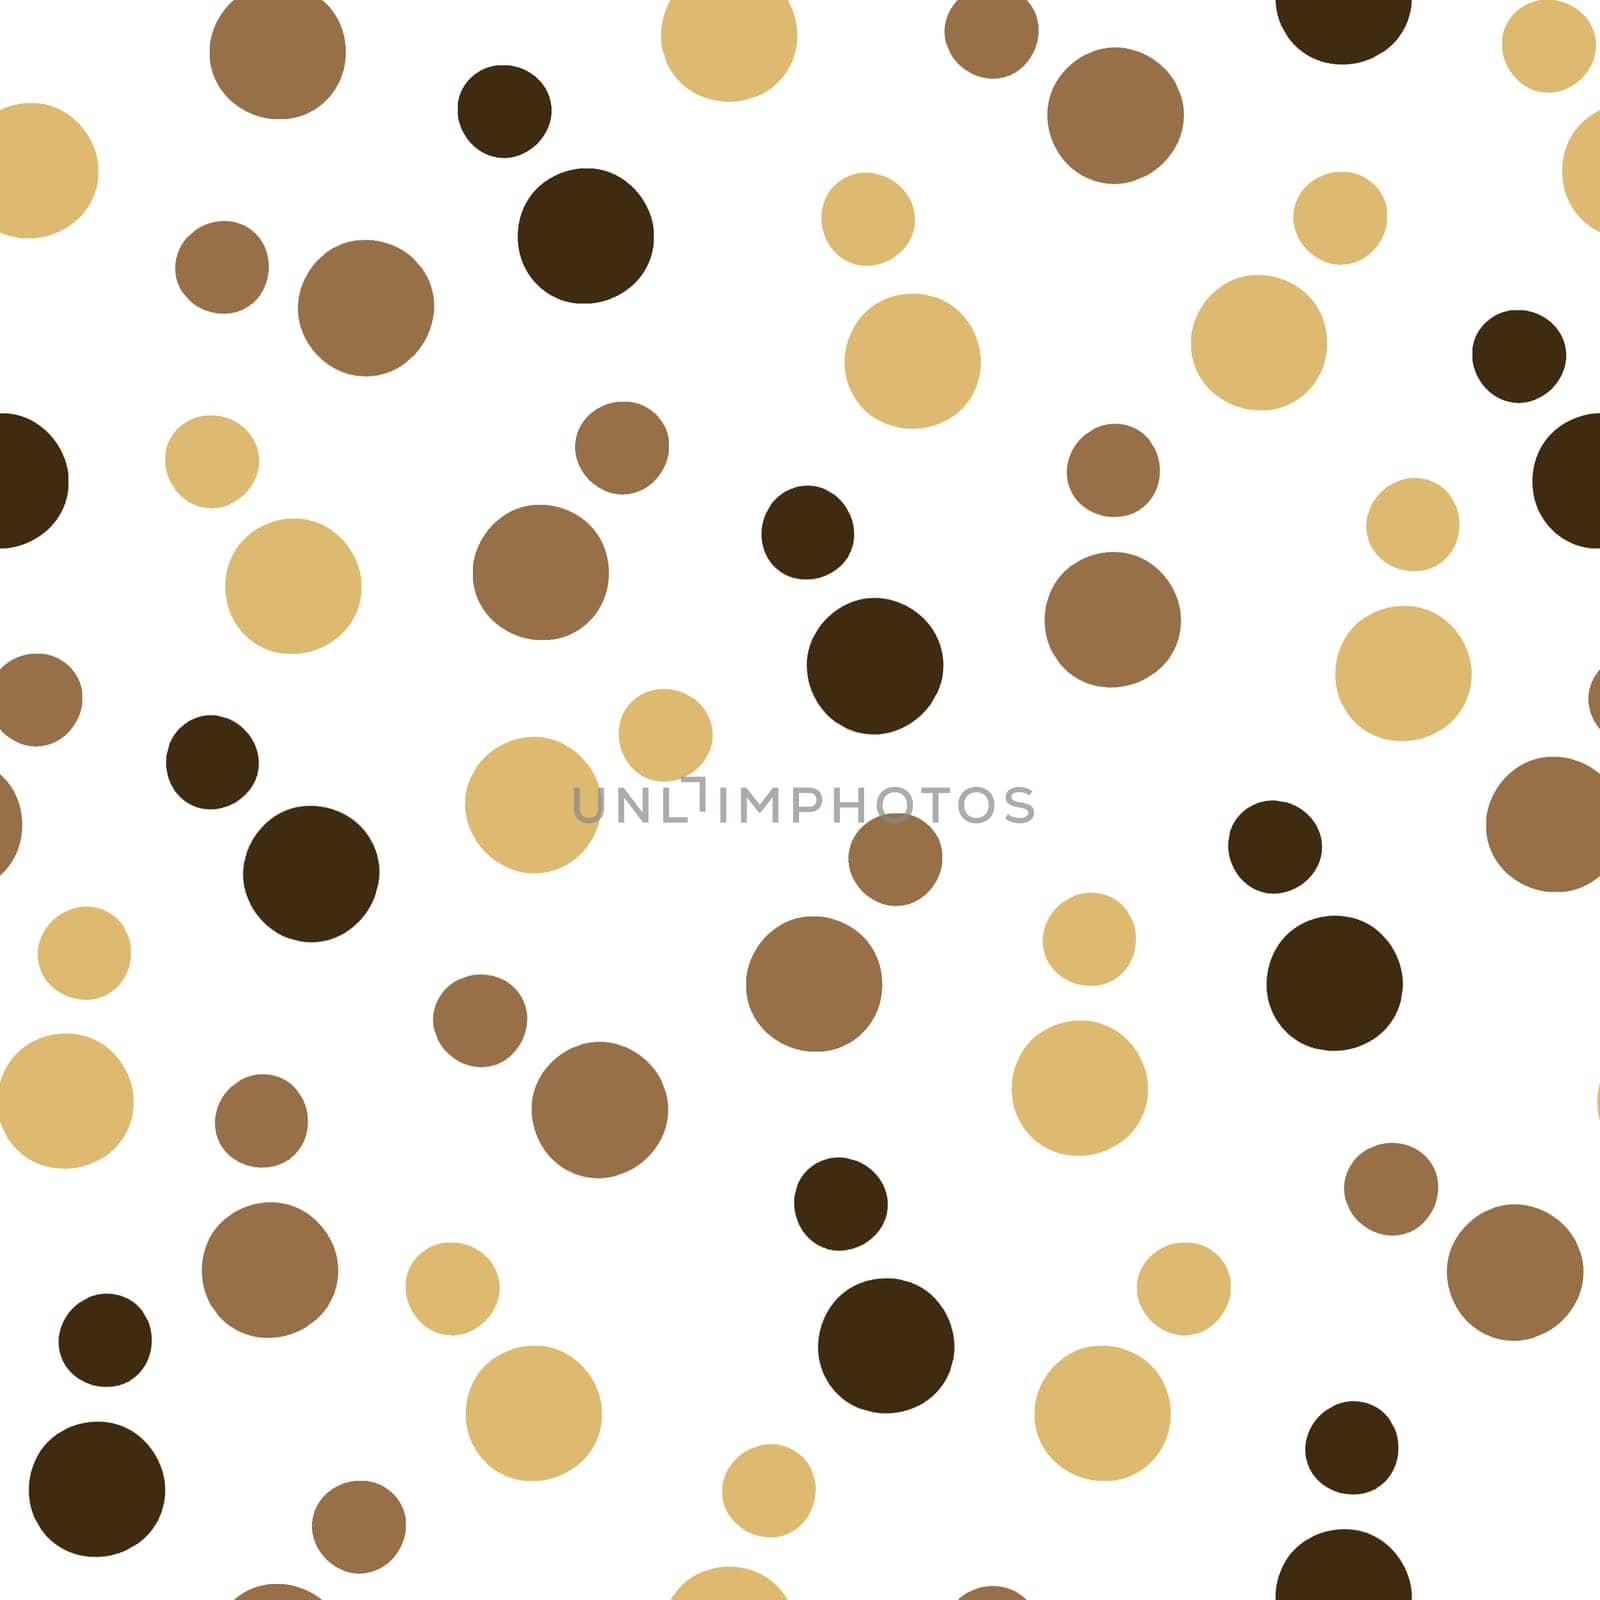 Seamless Repeatable Pattern with Air Bubbles Silhouettes in White and Brown Color. Handdrawn Sketchy Drawing Digital Paper. Creative Background for Children Room Poster, Scrapbooking.